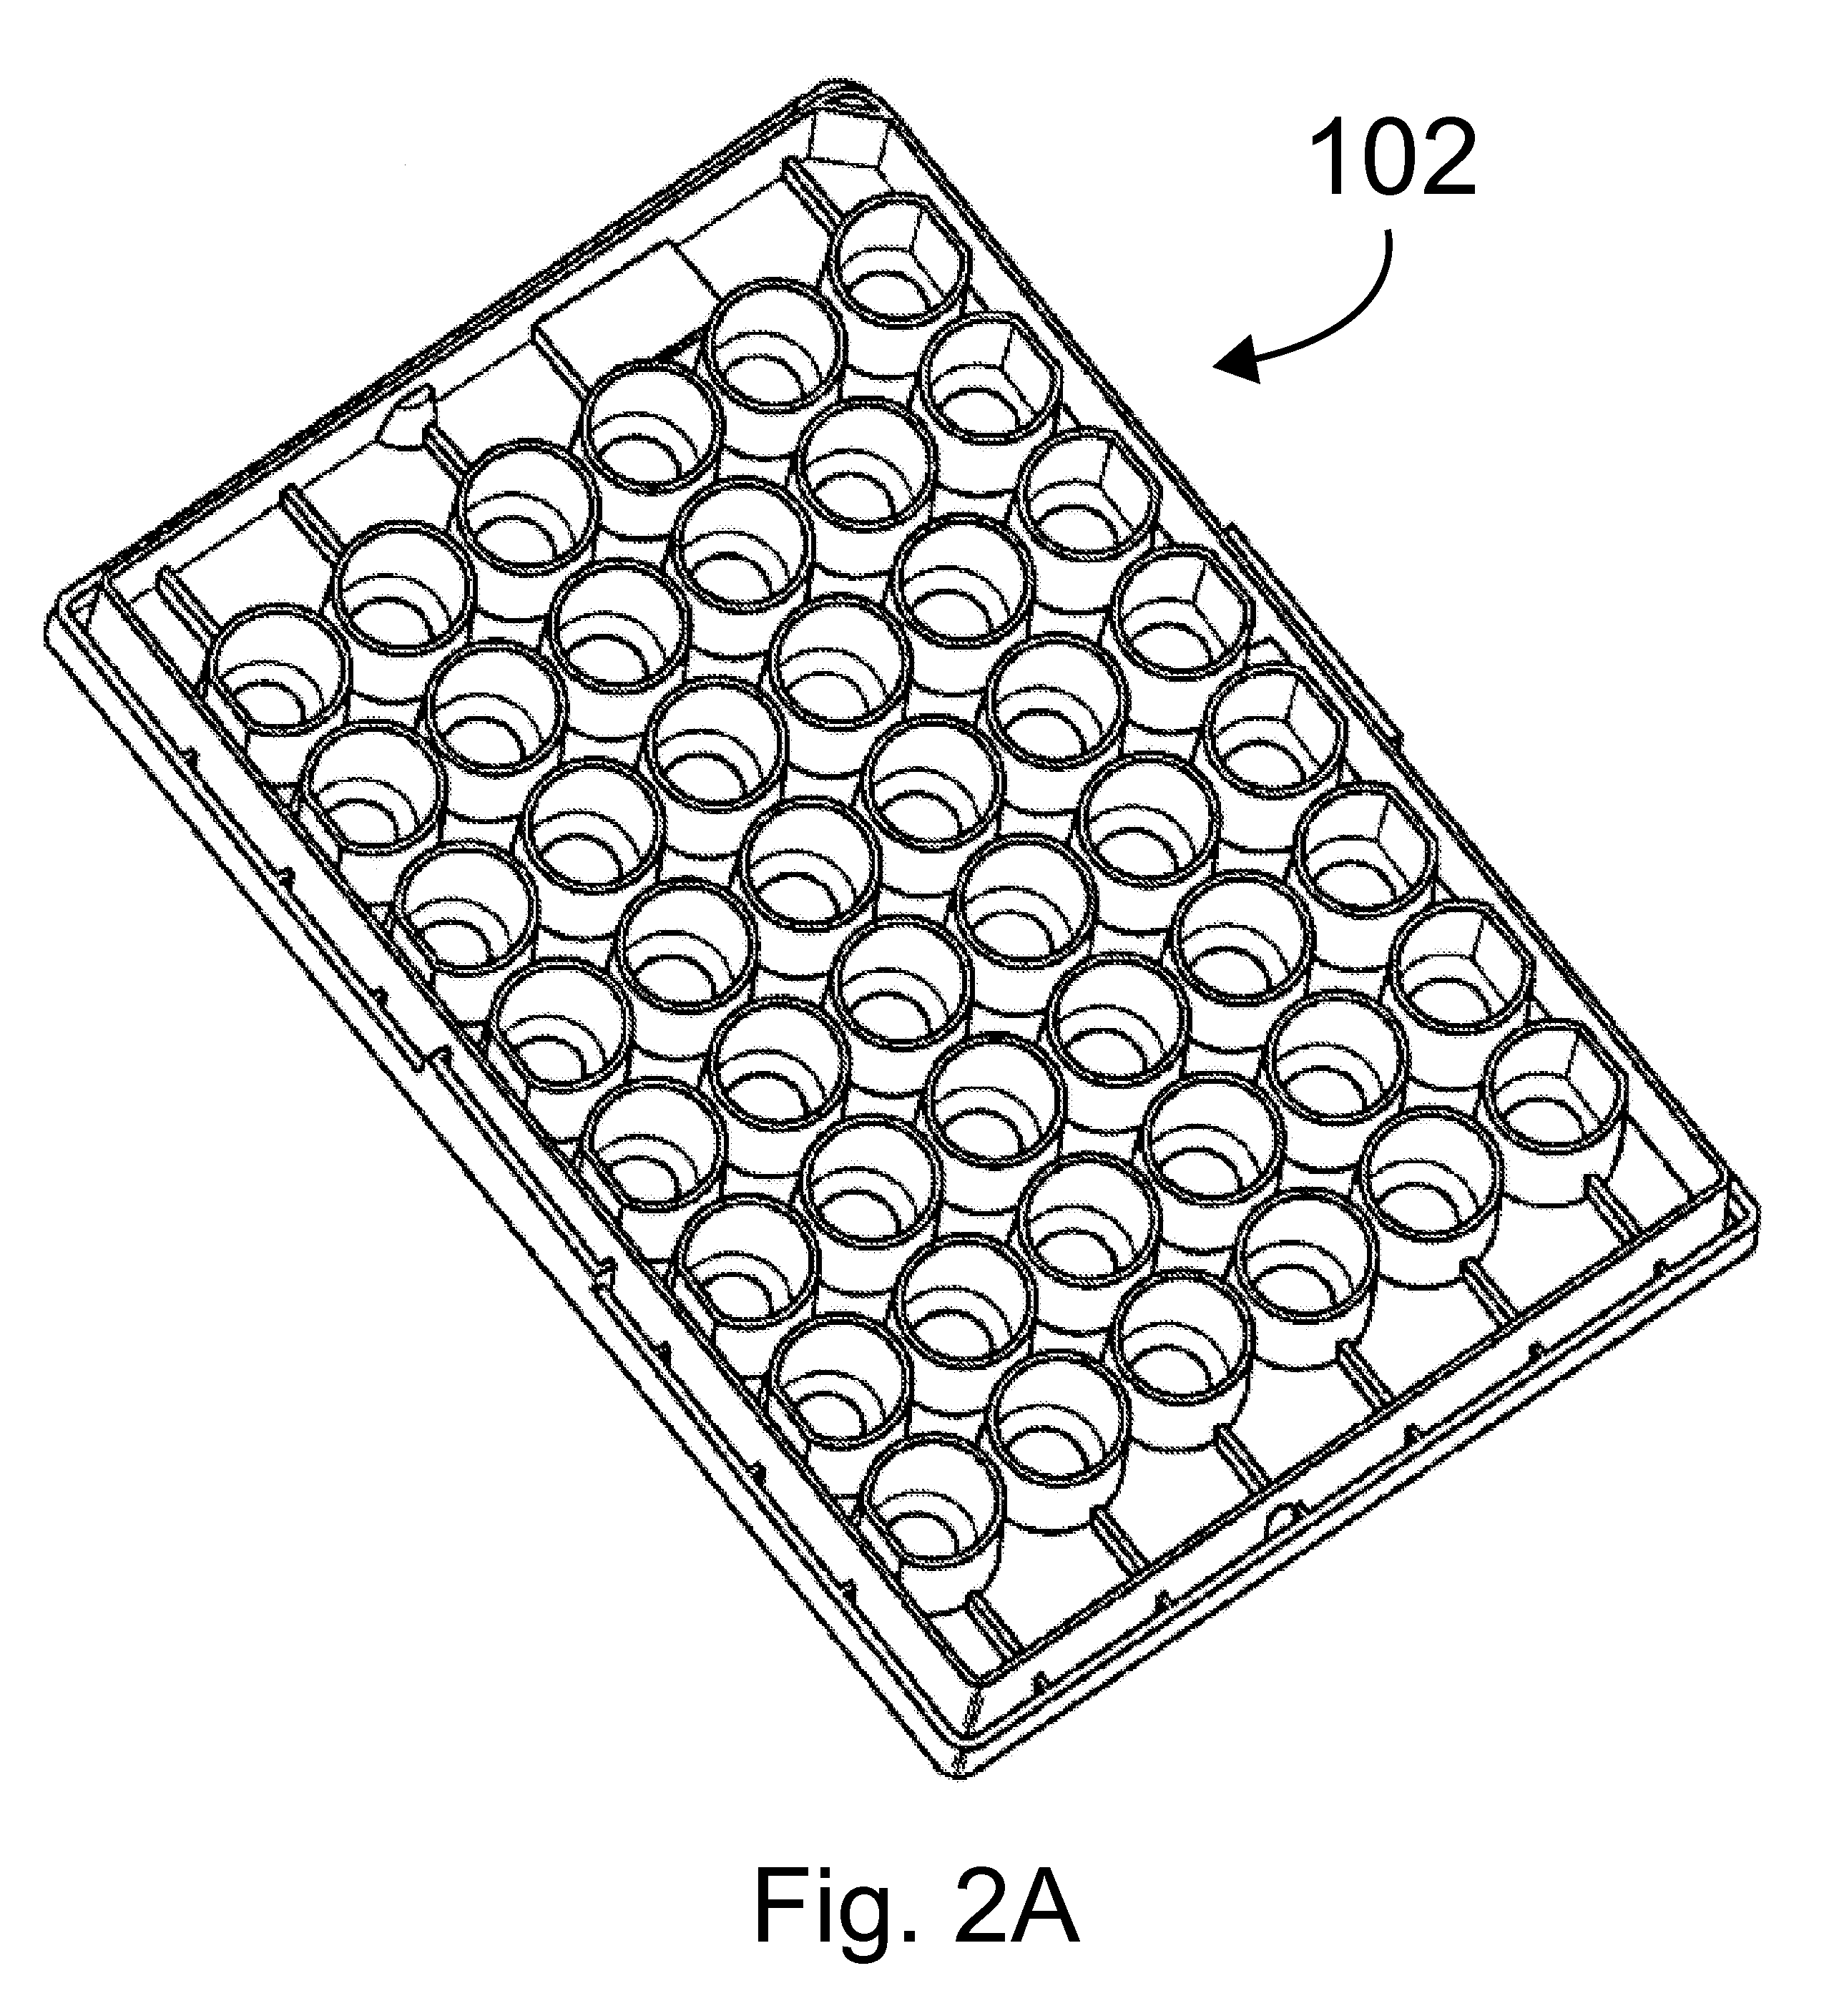 Devices, systems, and methods for targeted plating of materials in high-throughput culture plates